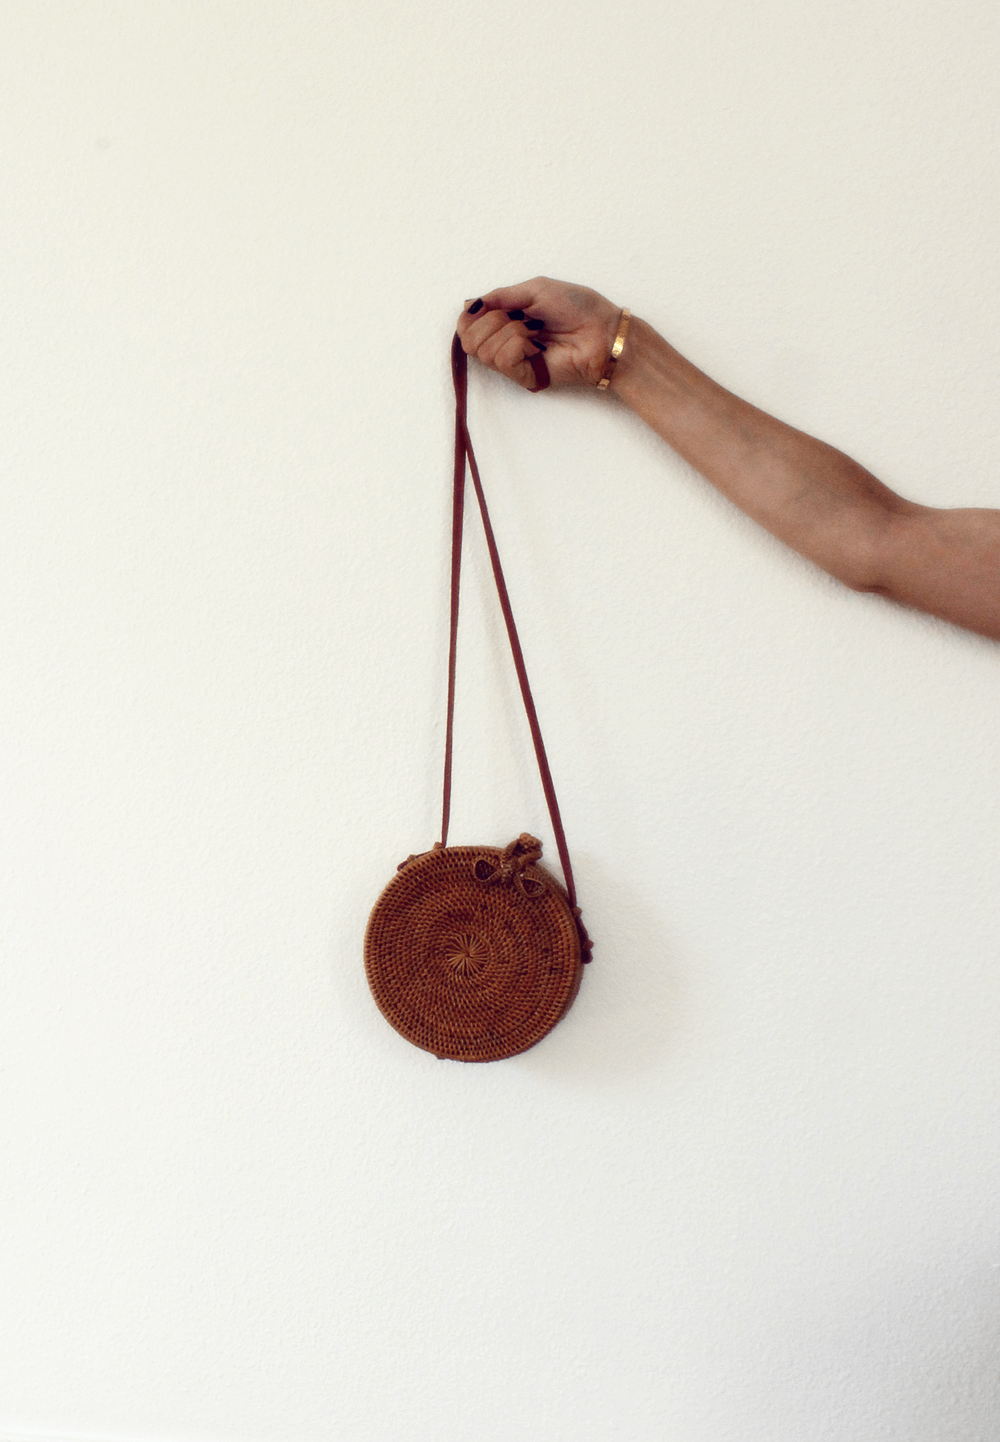 The mass hysteria around round bali straw bags is real